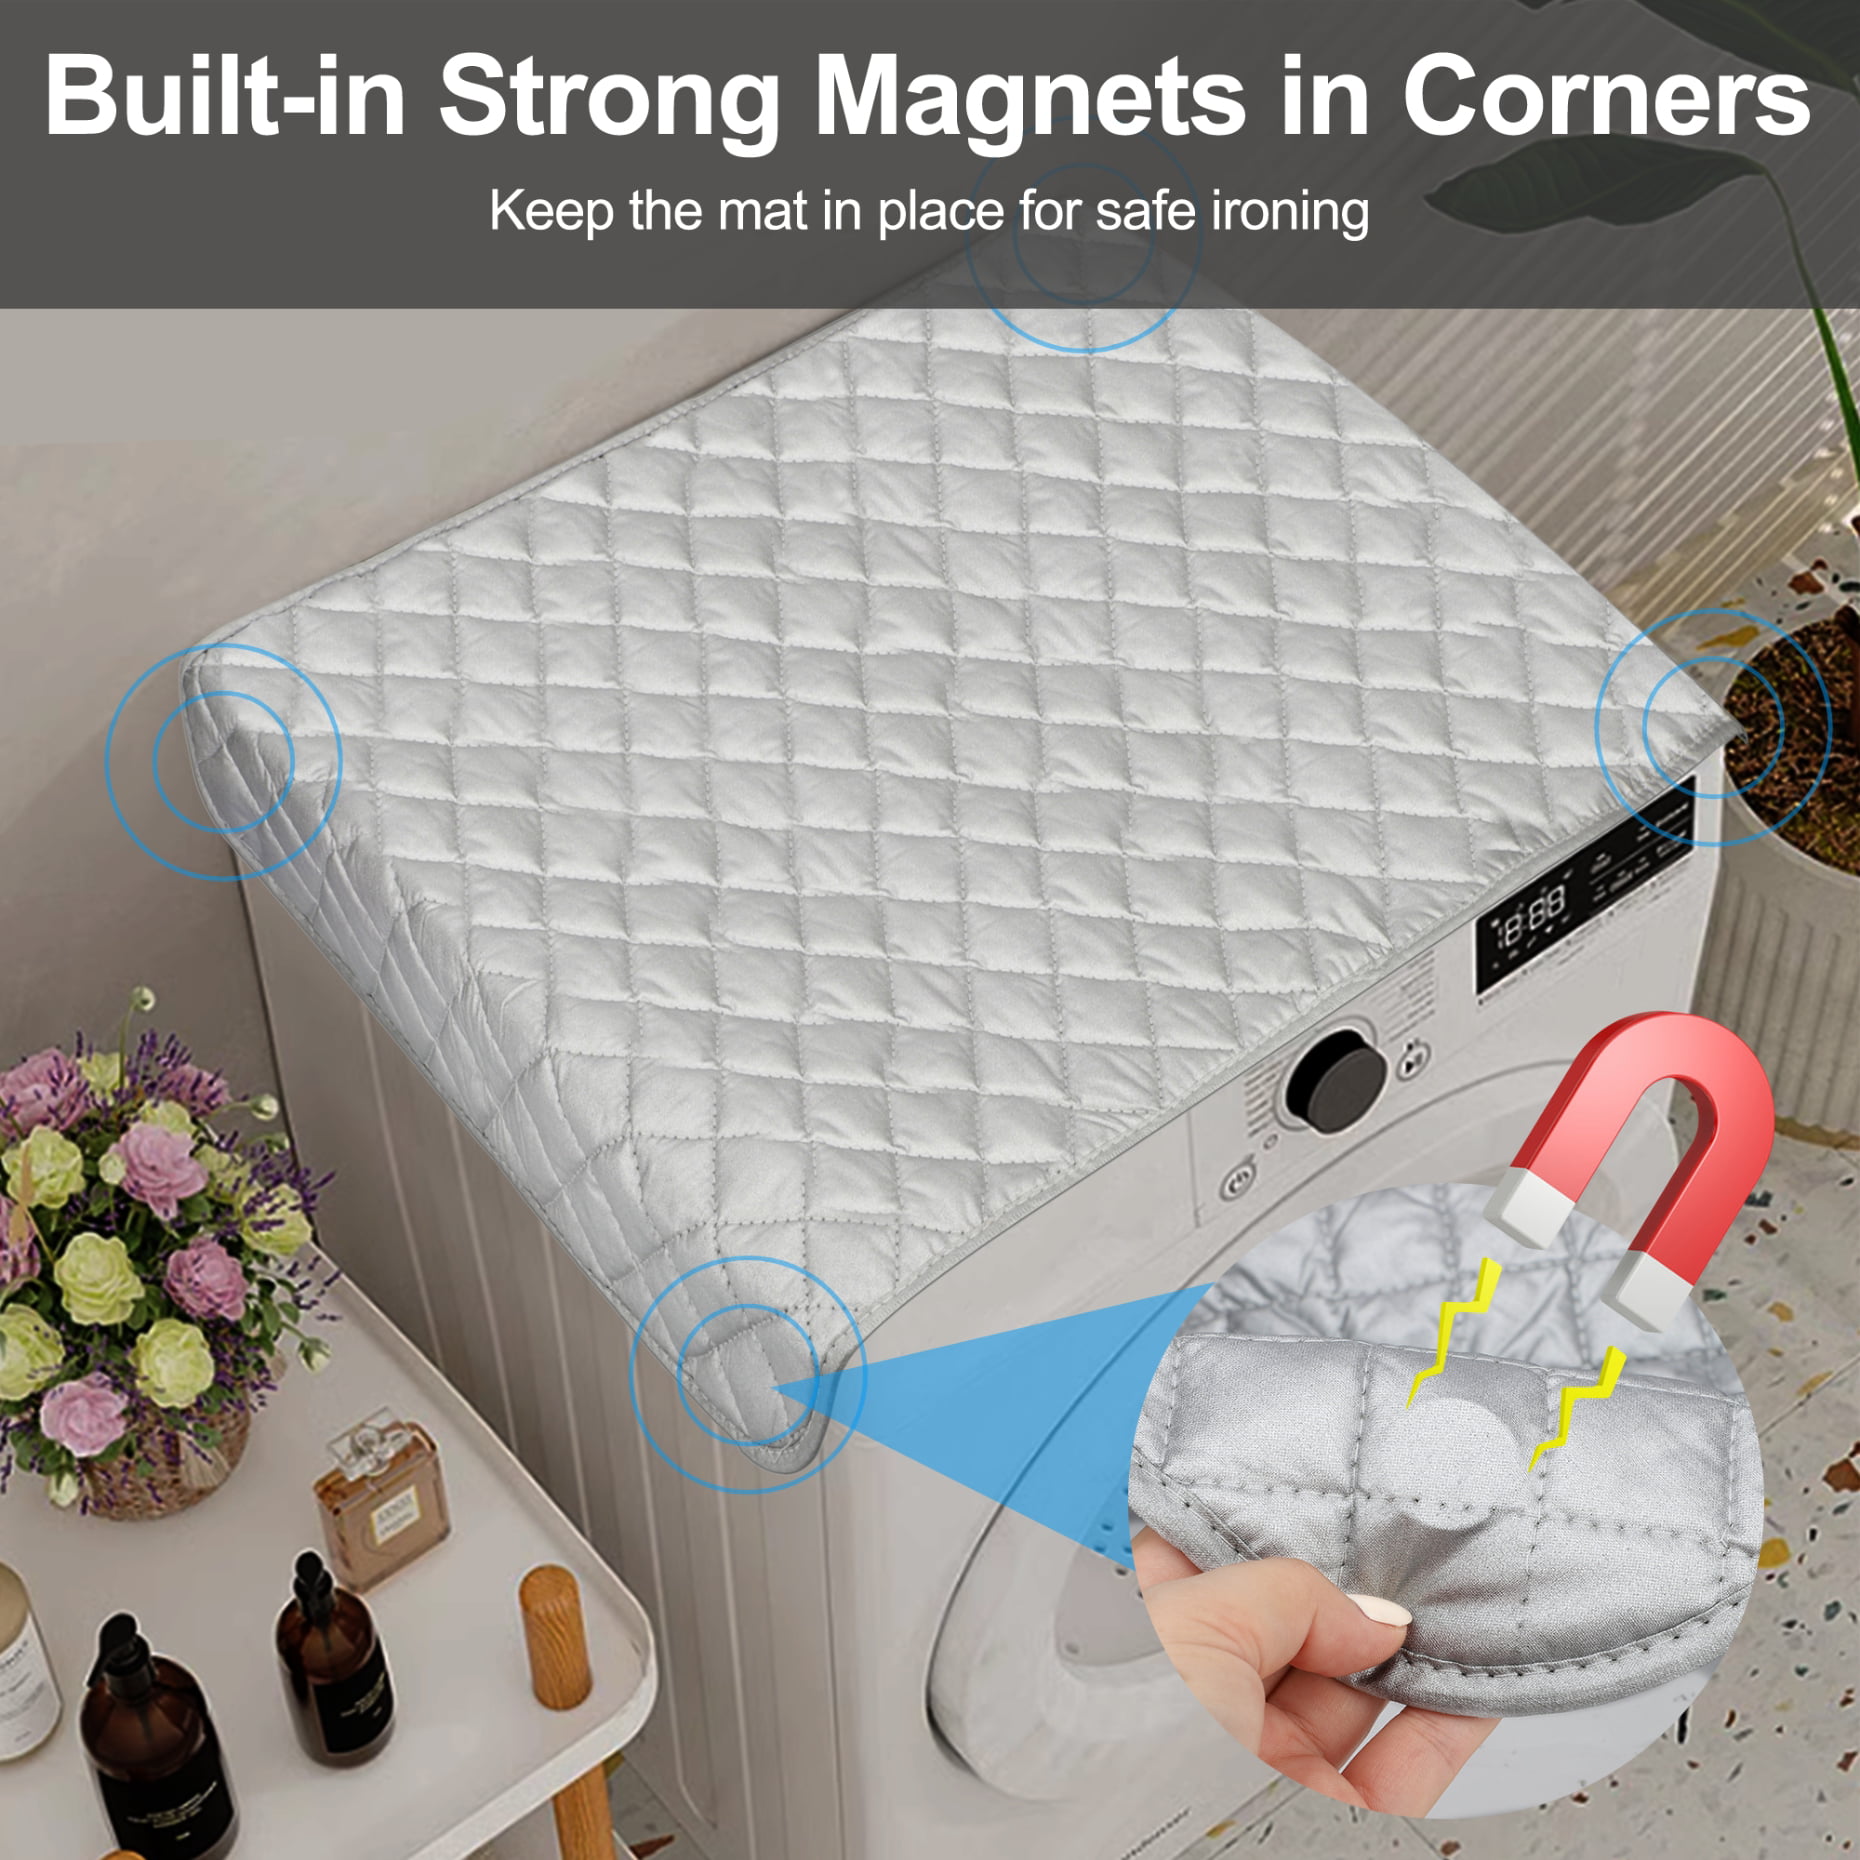 Compact Portable Ironing Mat Ironing Board Travel Dryer Washer Iron Anywhe  F F❤❤